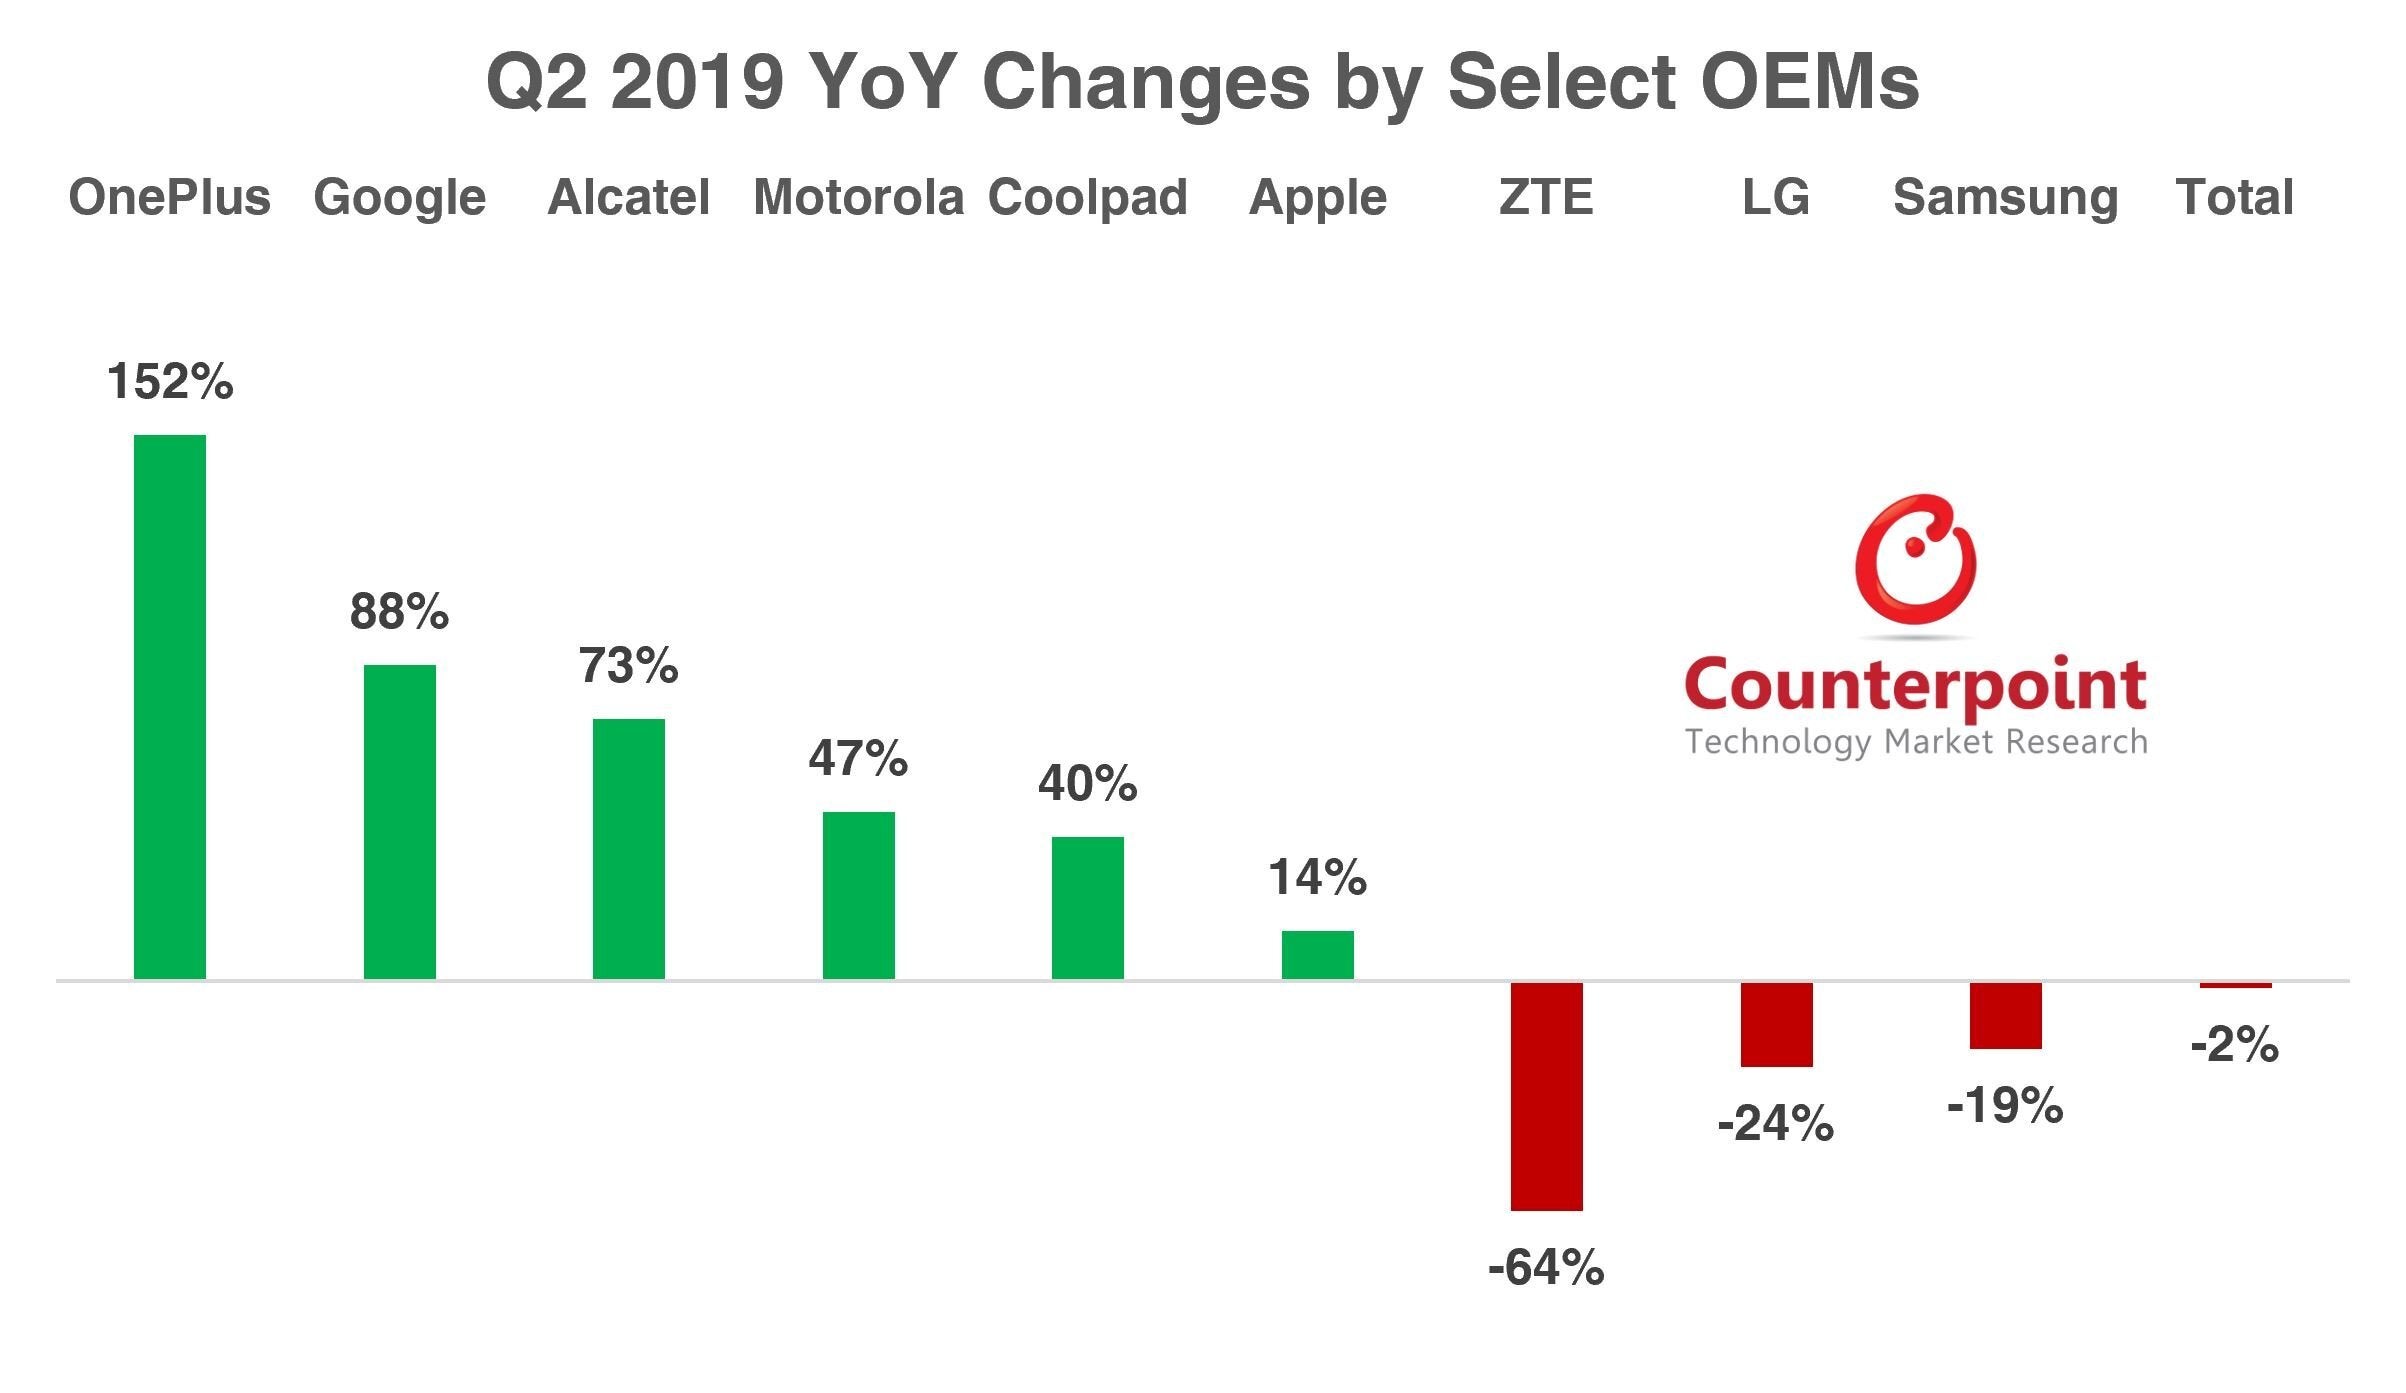 OnePlus and Google had big improvements in U.S. handset sales during the second quarter - OnePlus and Google's value pricing lead to strong Q2 growth in the U.S.